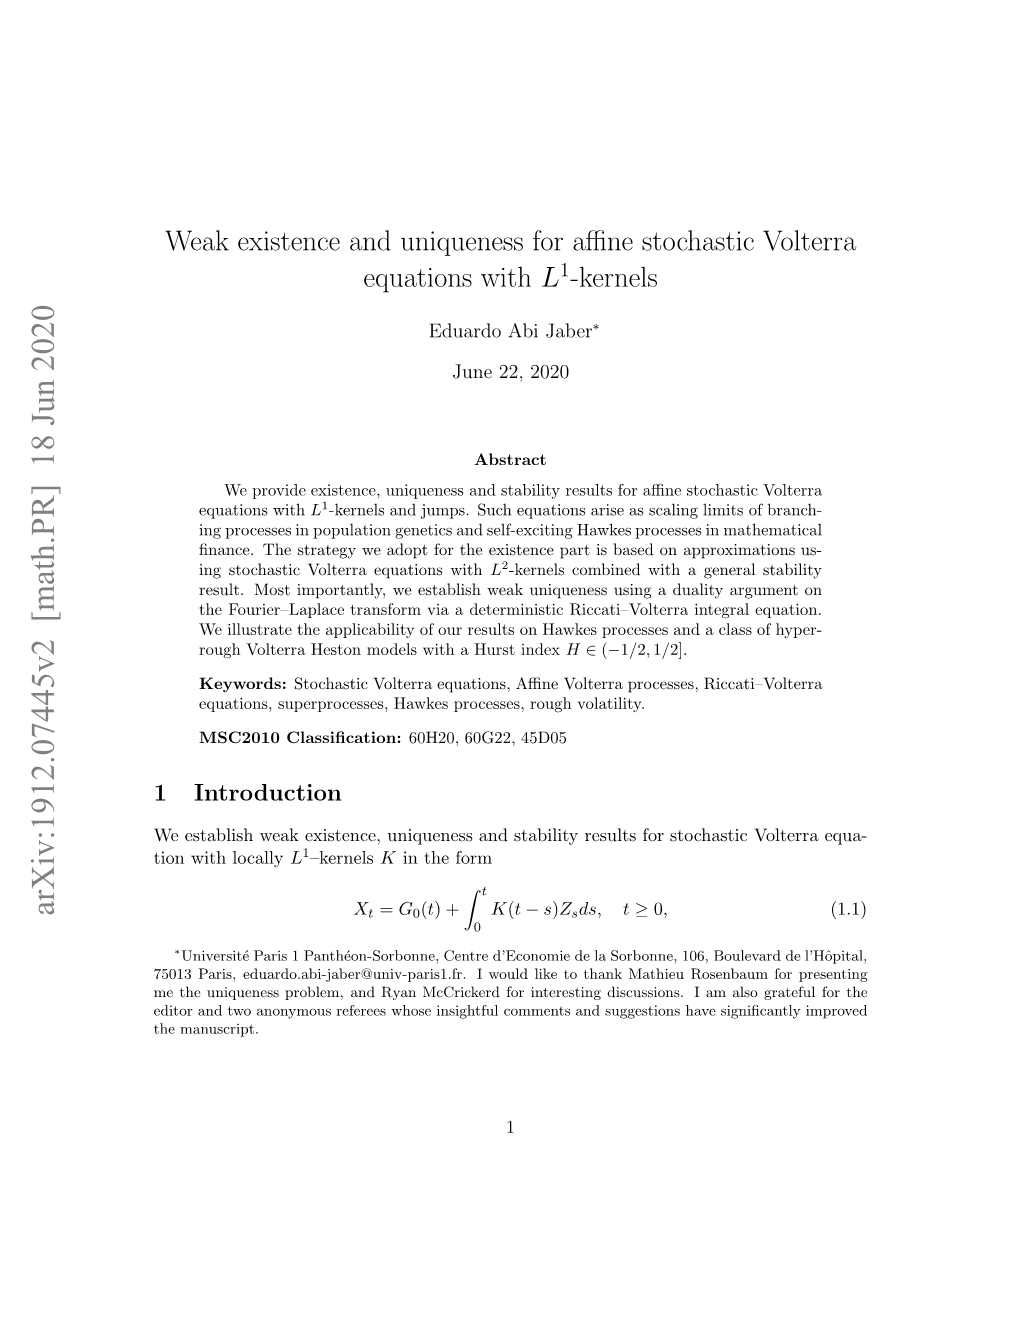 Weak Existence and Uniqueness for Affine Stochastic Volterra Equations